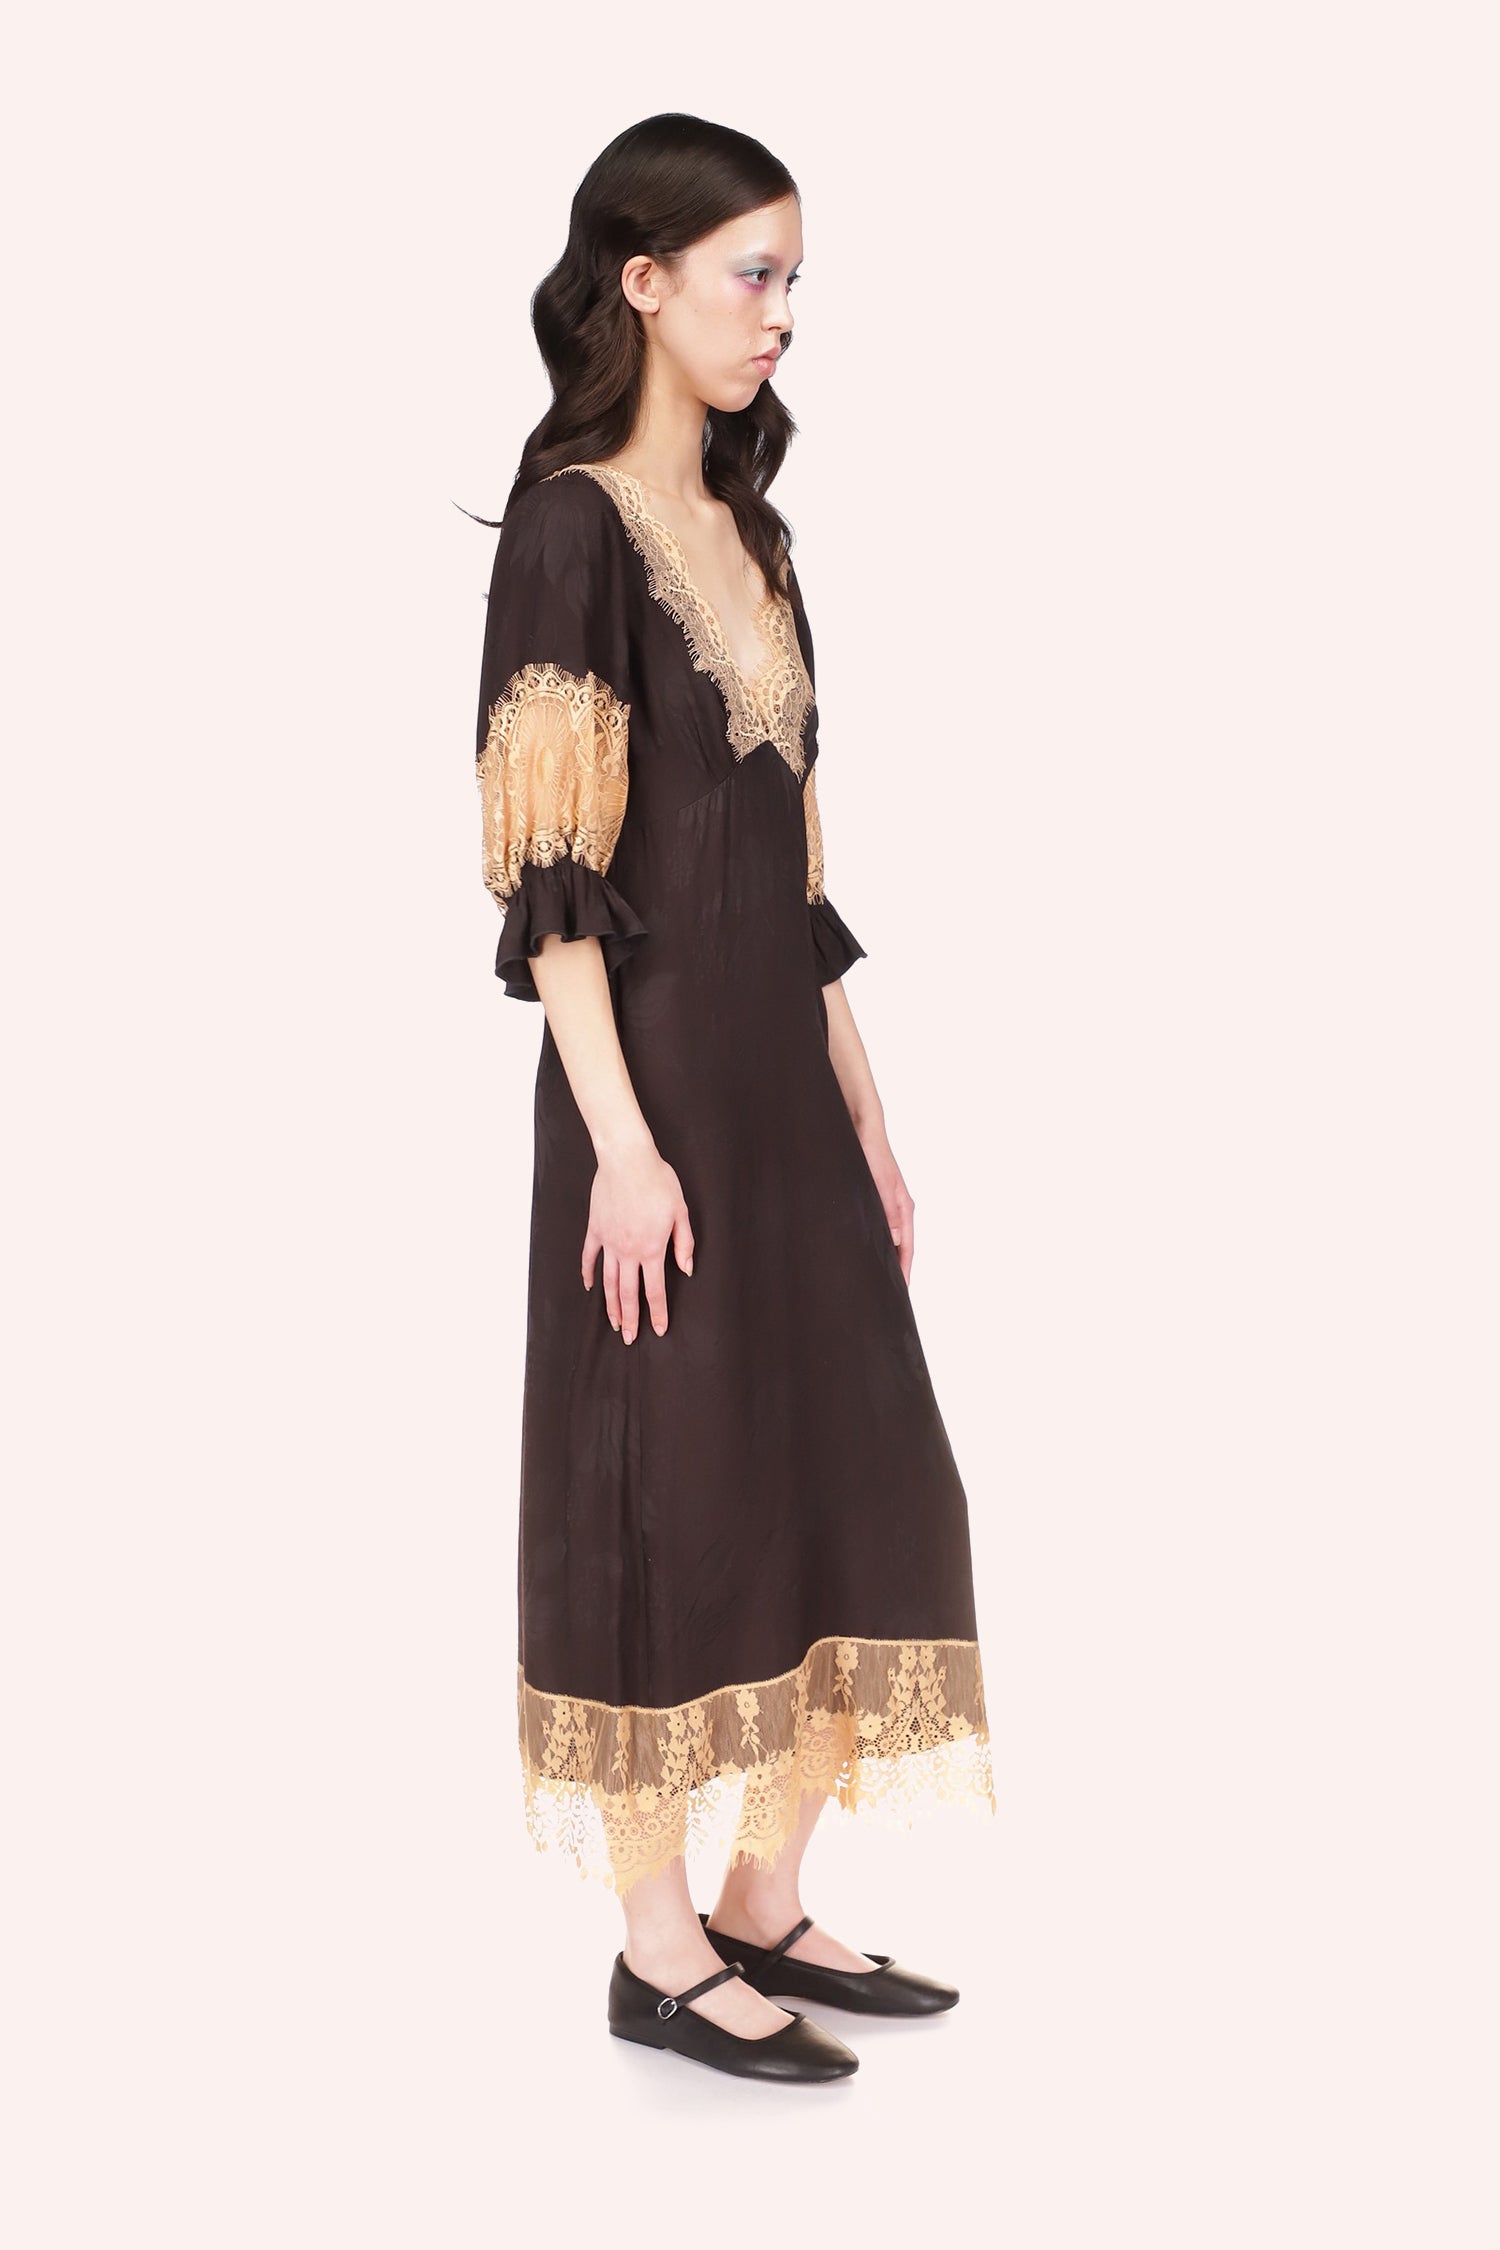 Long Sleeve Dress Black, deep V-cut collar, large beige transparent lace at mid-arm and bottom 